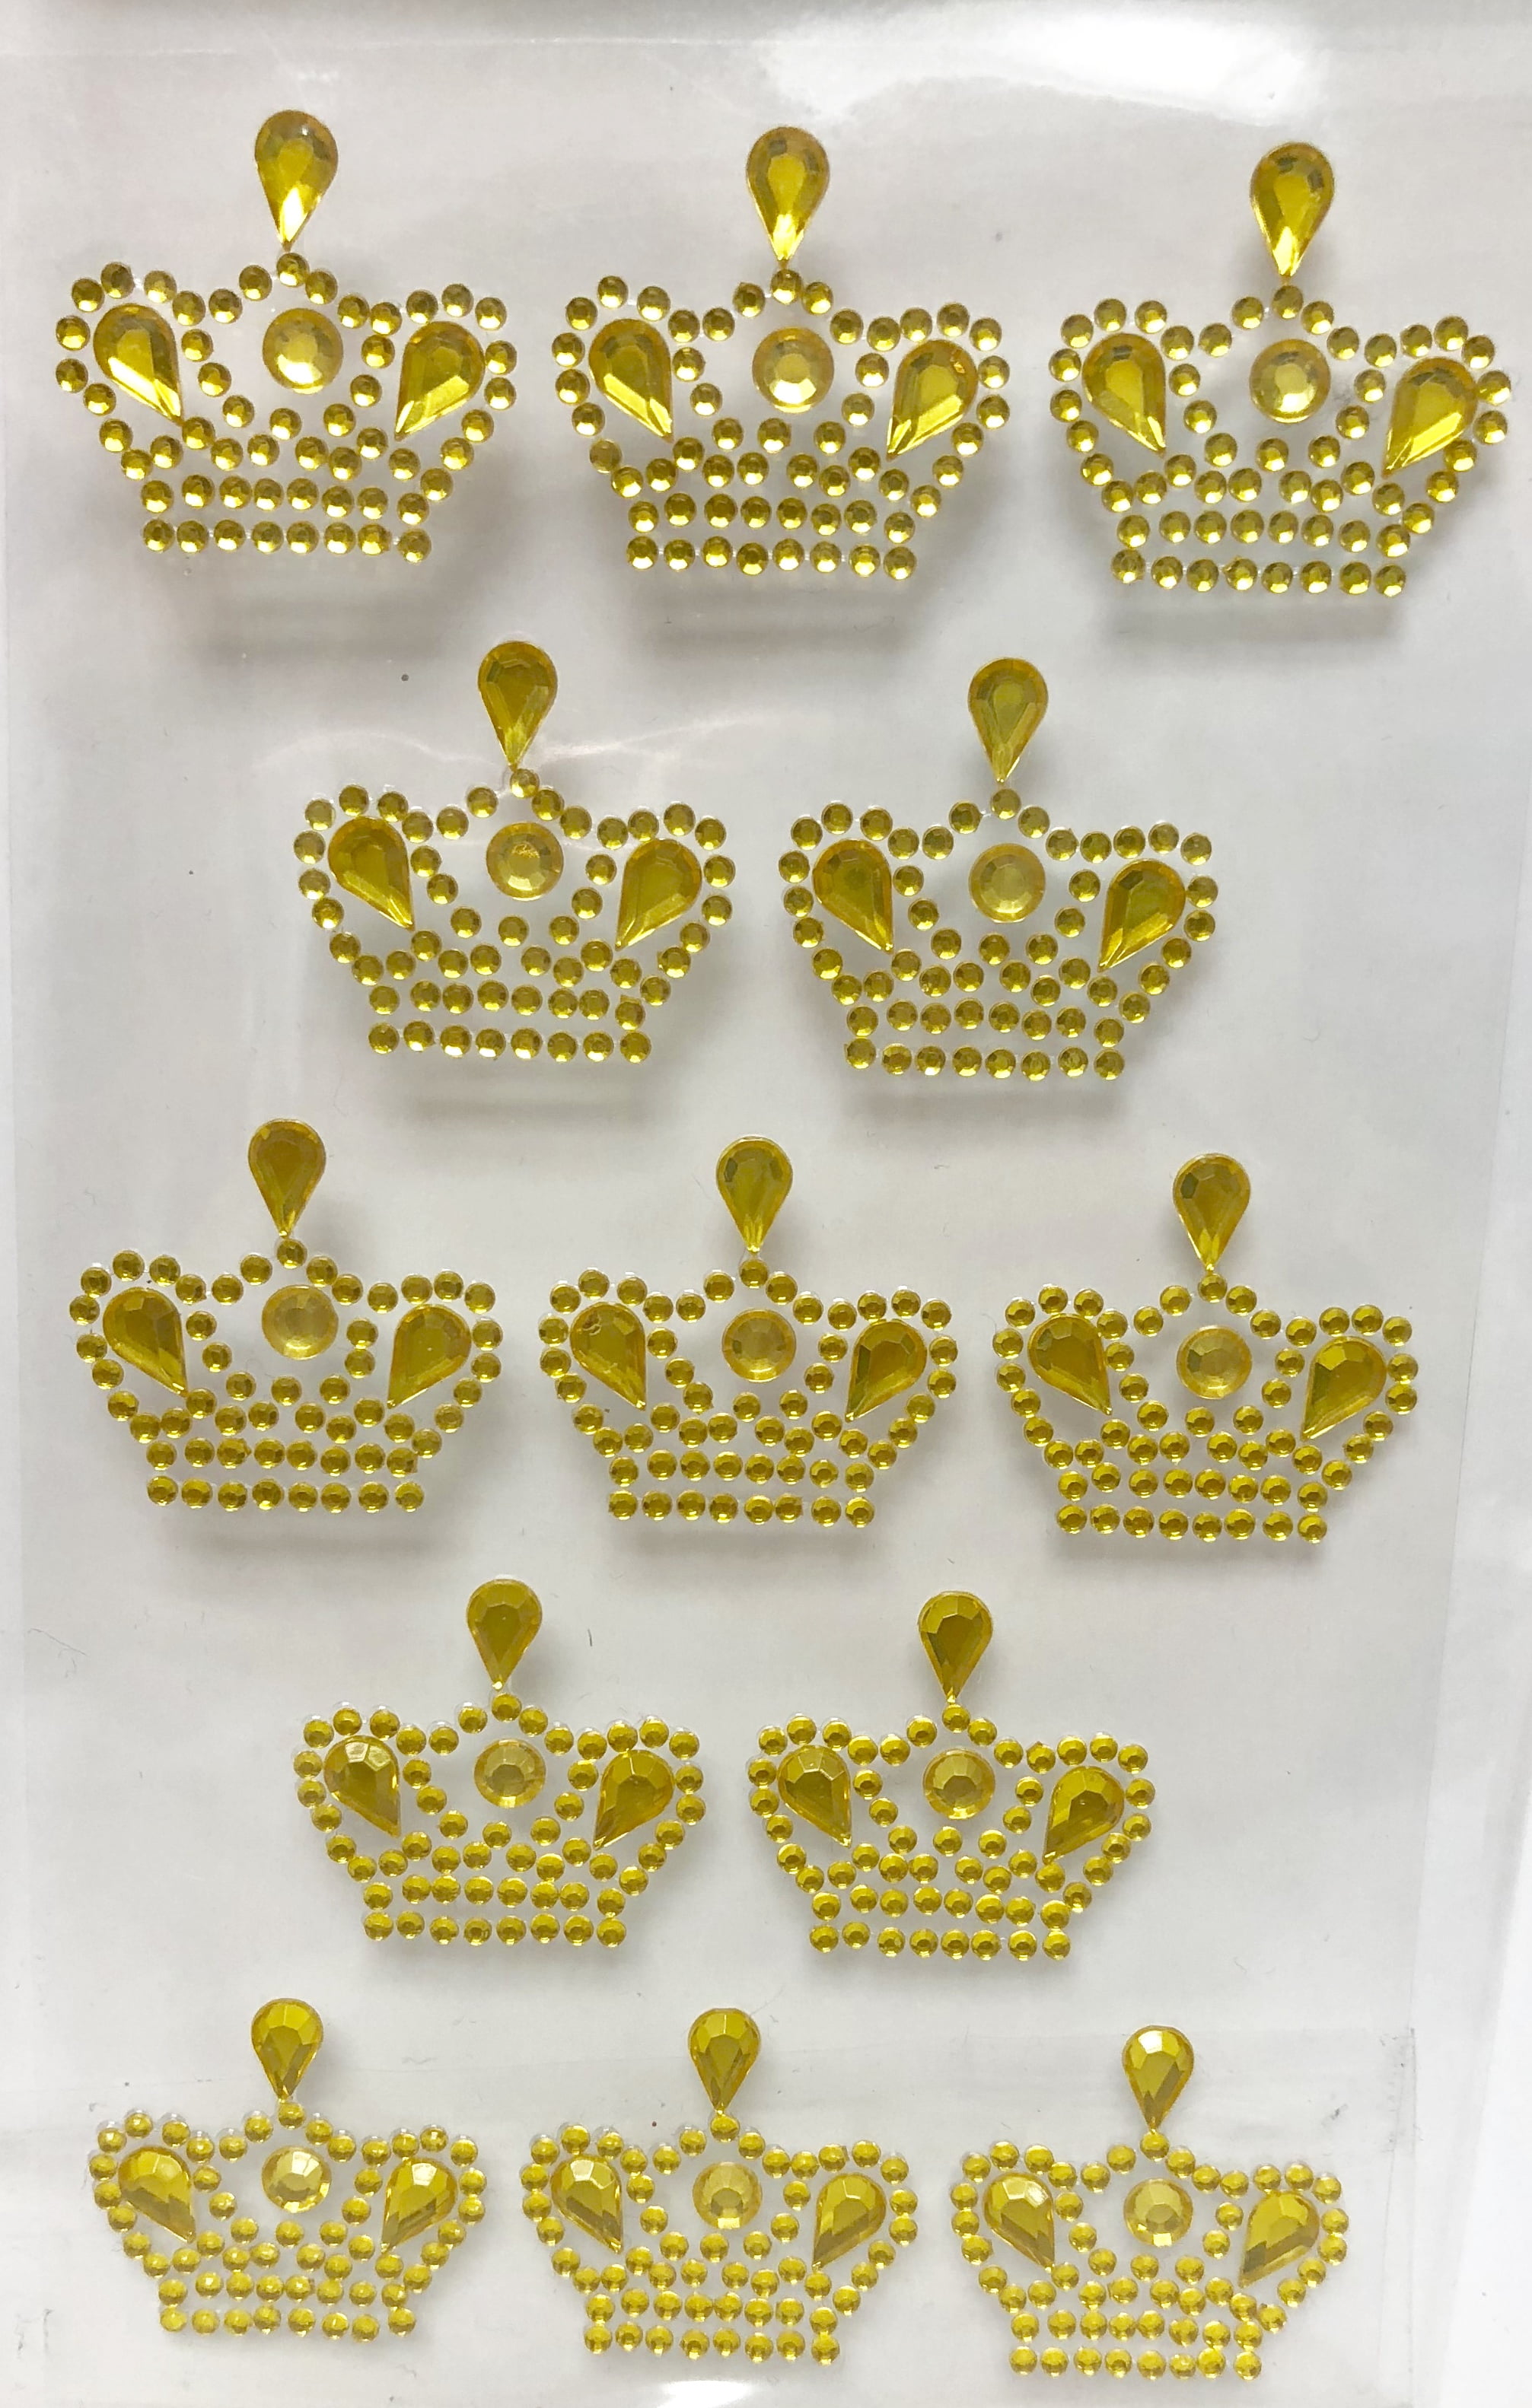 3 Sheets of Gold Crown Prince Princess Sticker Charms 3D Baby Shower or  Birthday Scrapbooking Self Adhesive Stickers Party Motives Favor  Decorations 